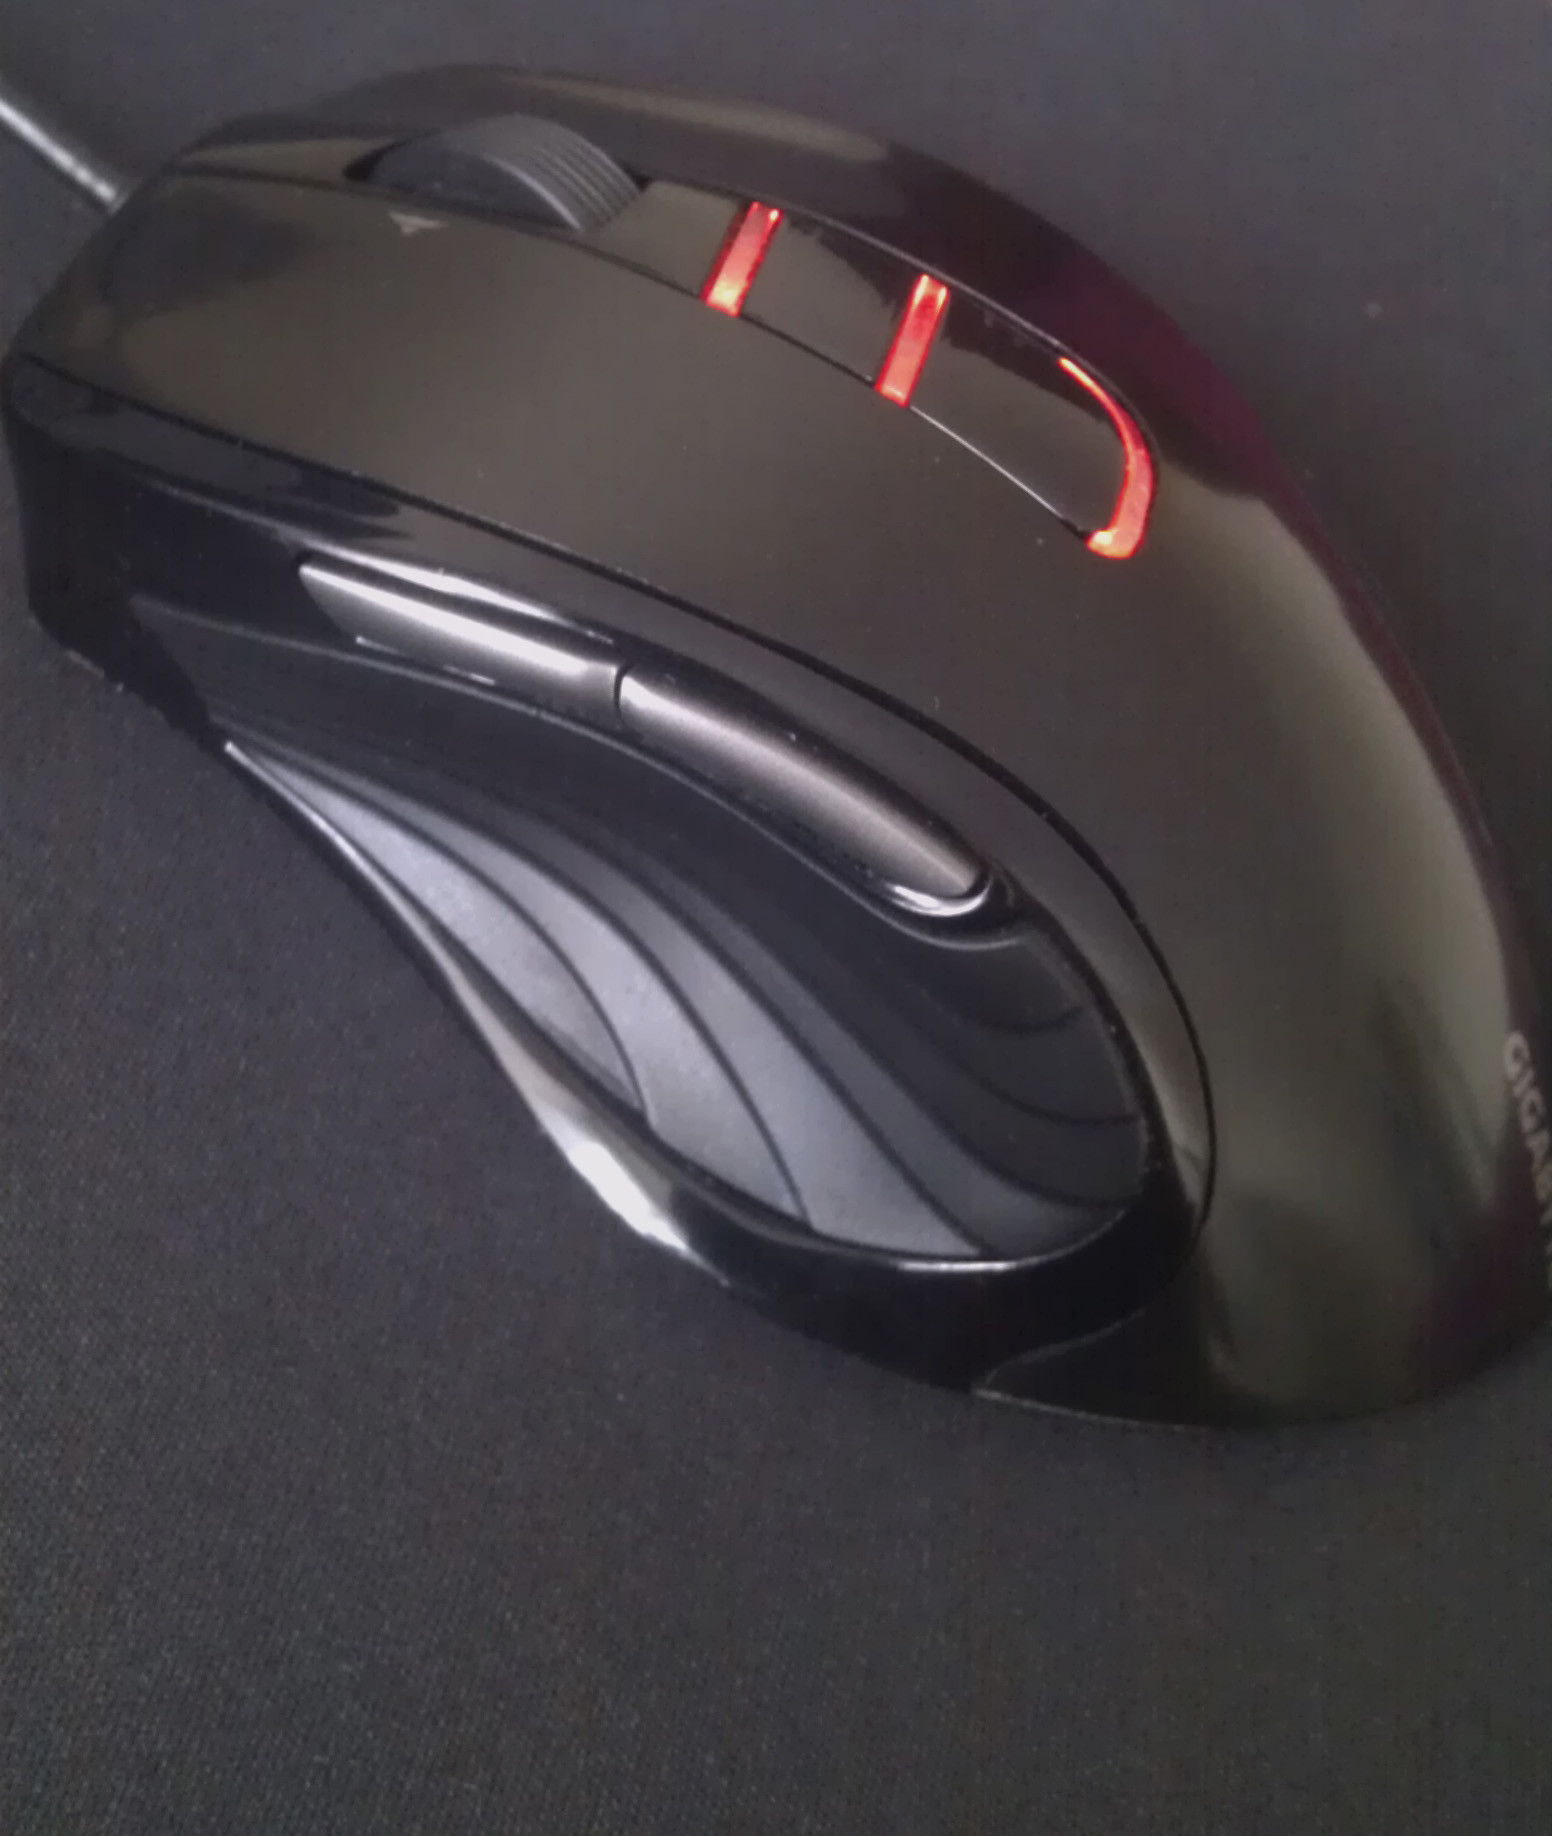 gigabyte mouse drivers m6900